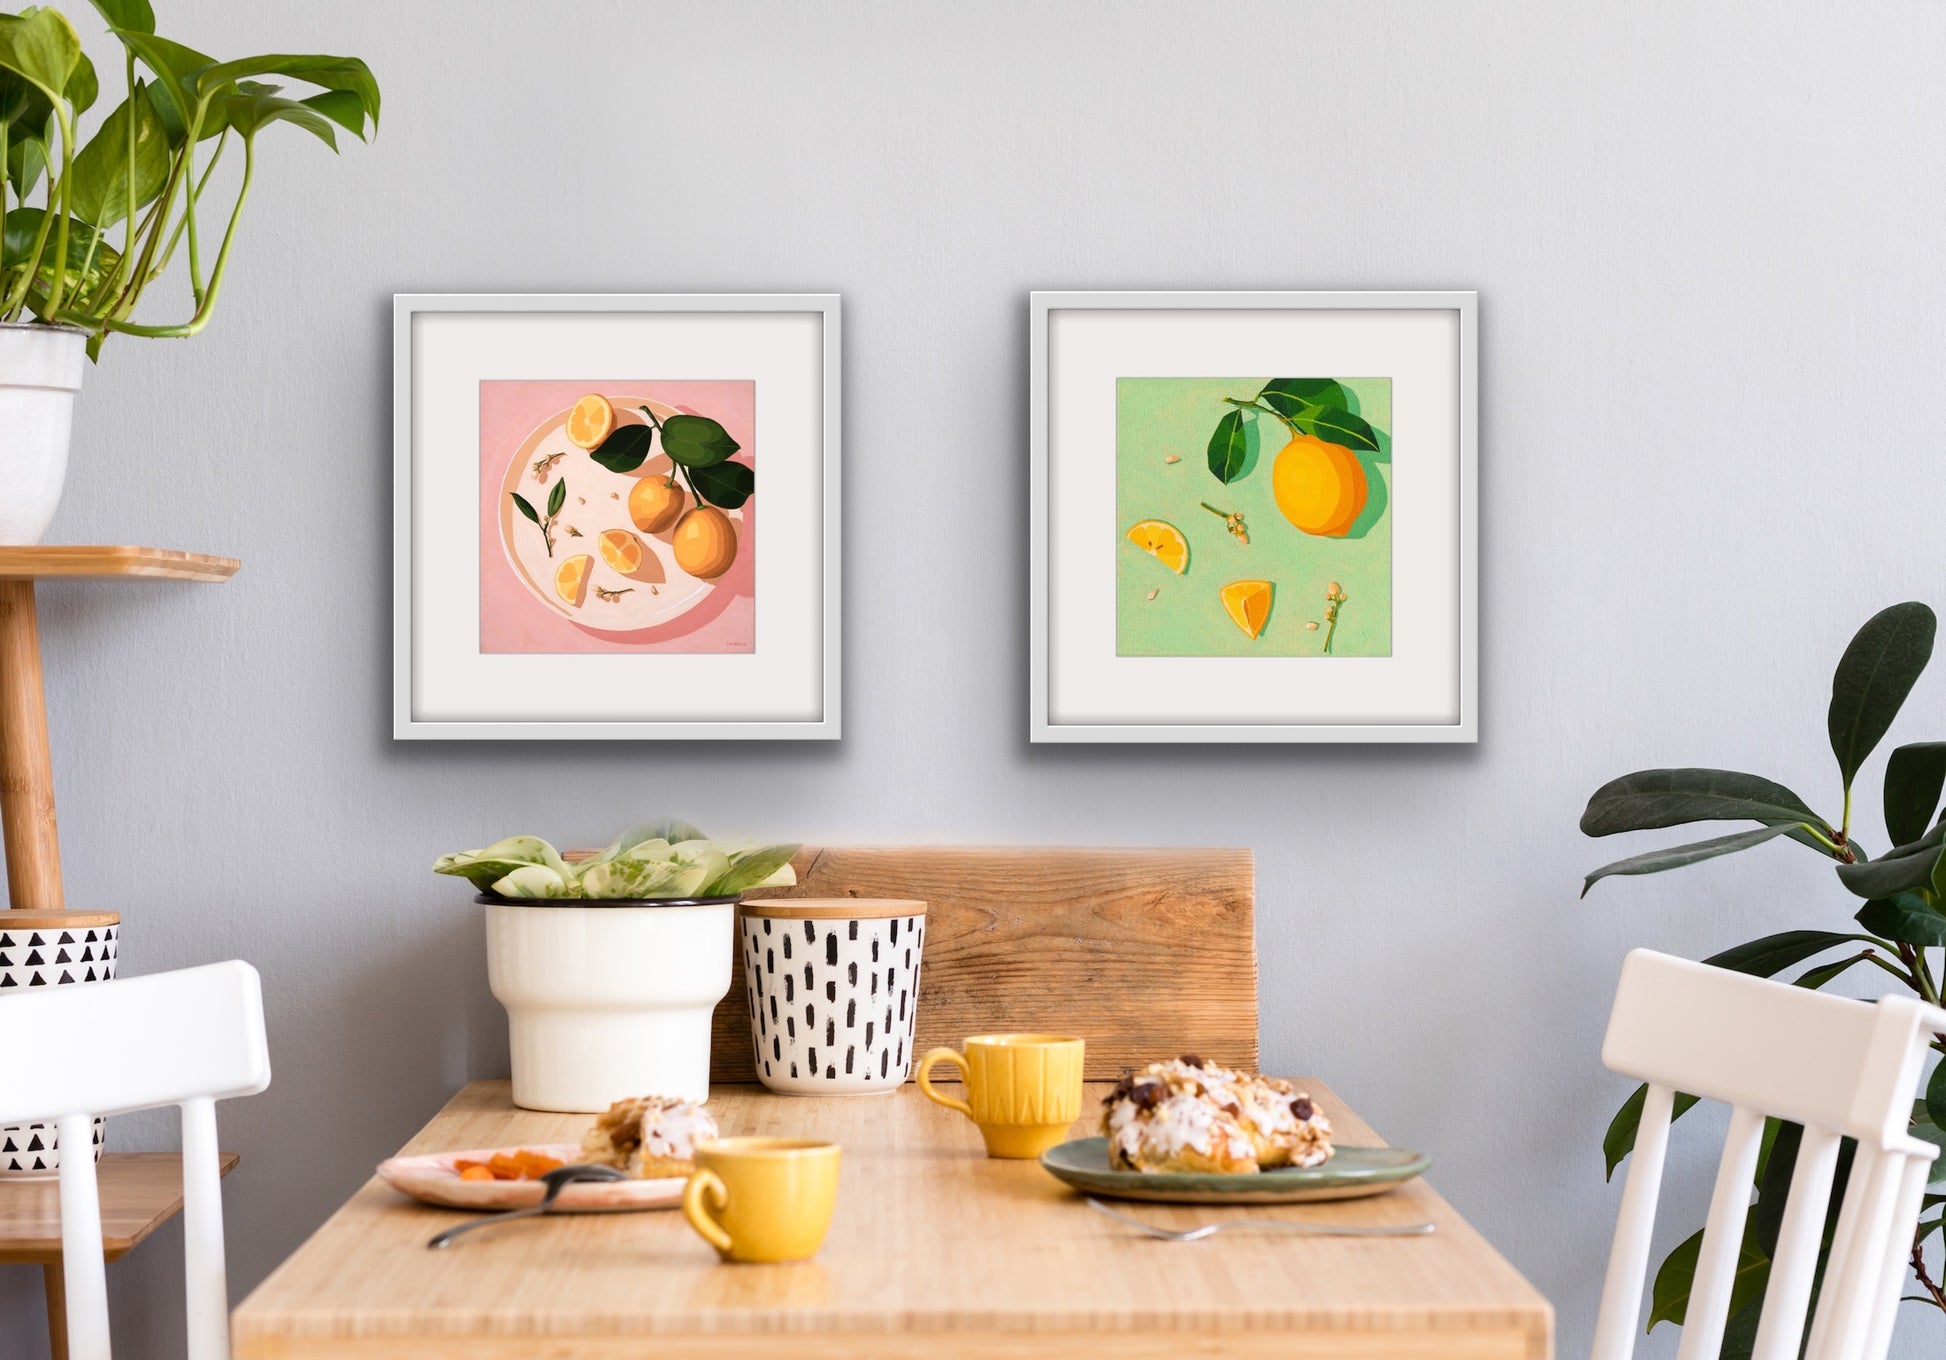 fine art print of a colorful and modern original oil painting of bright yellow lemons on a warm pink background with strong shadows